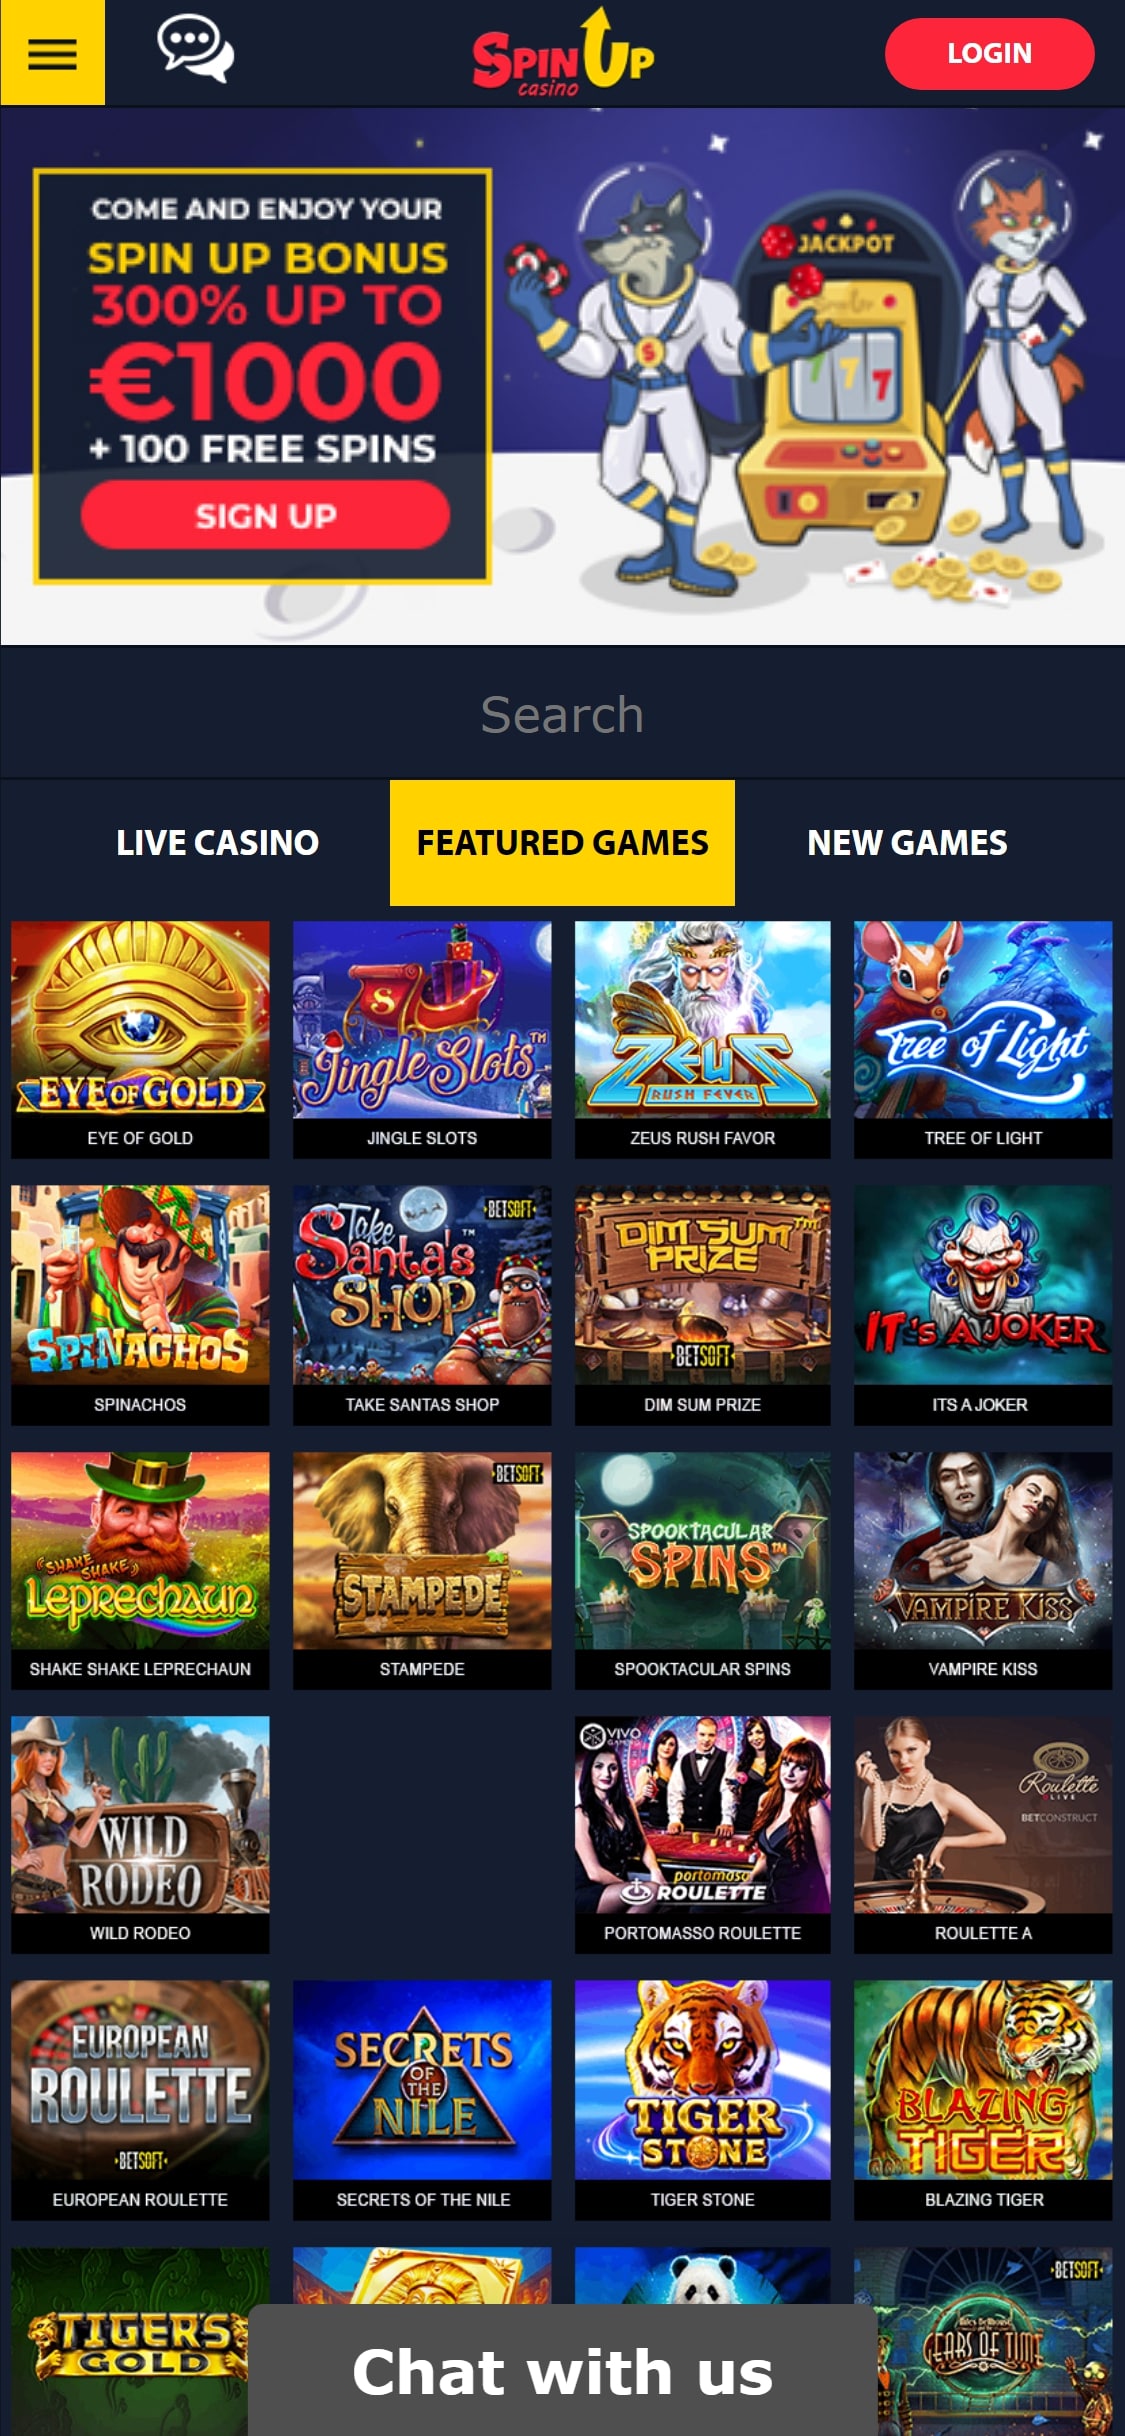 Spin-up Casino Mobile Review